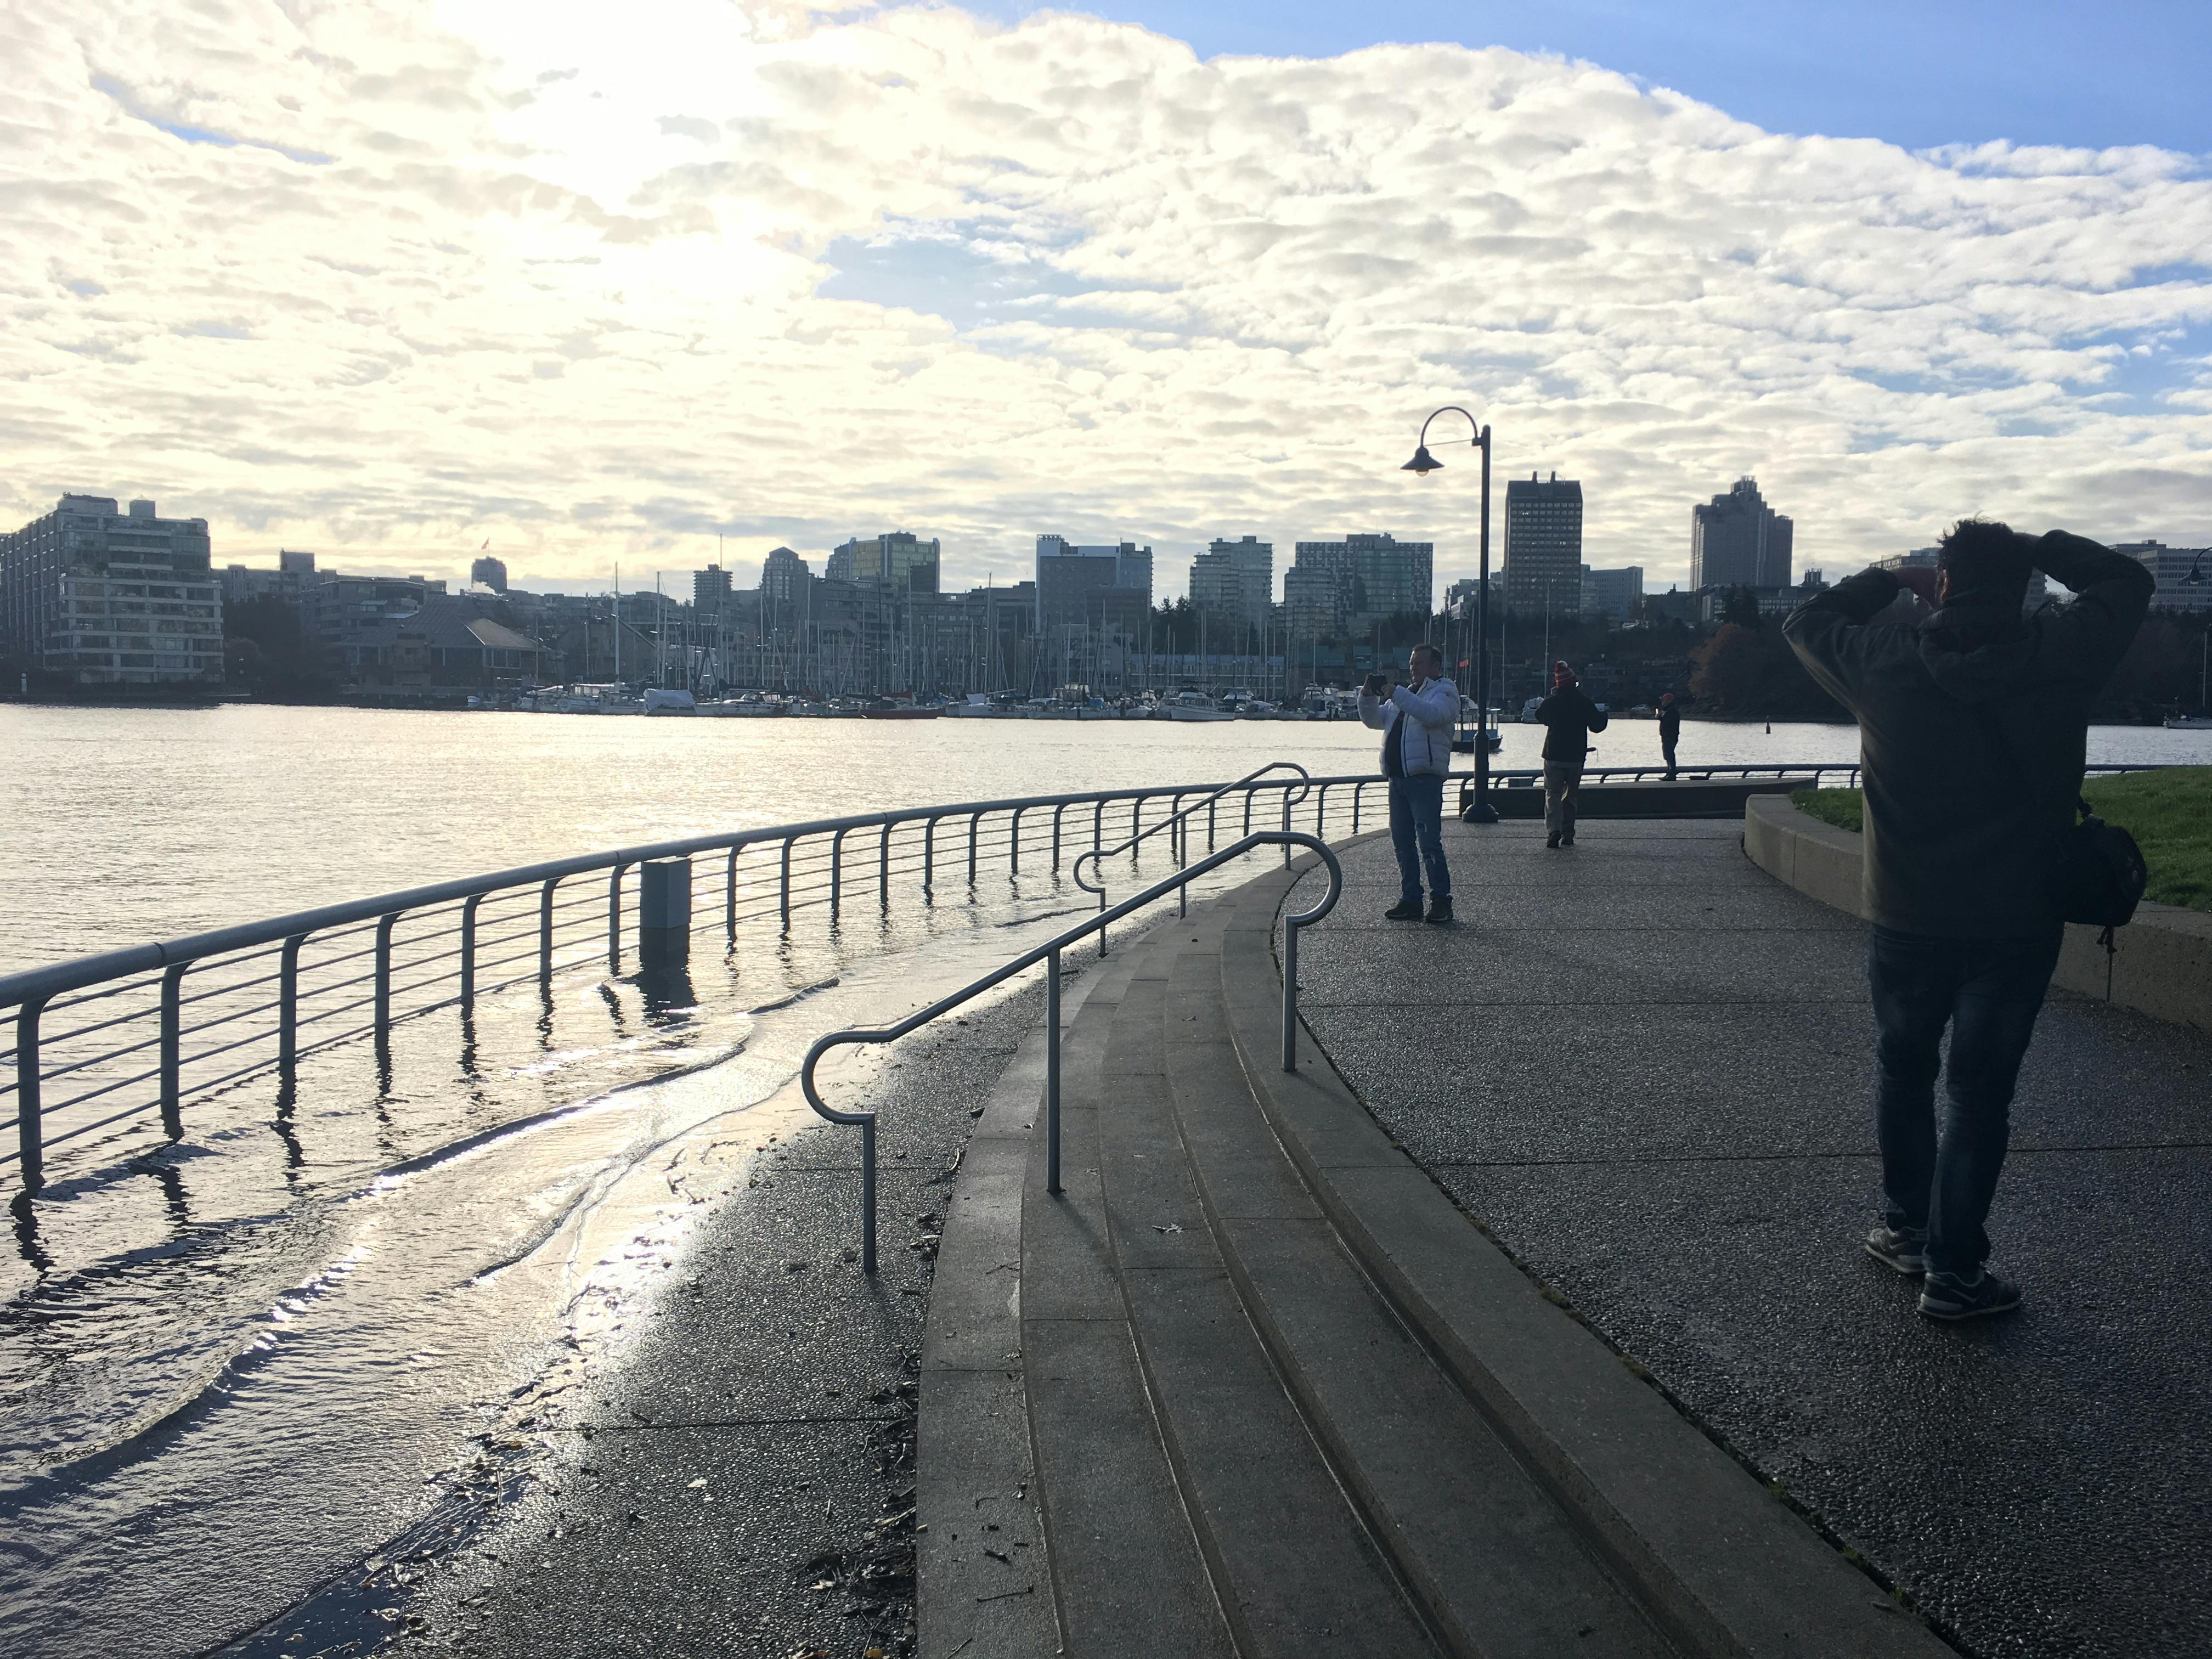 2017 king tide event in Yaletown. The water is lapping over the edge of the walkway and is flooding parts of the seawall.